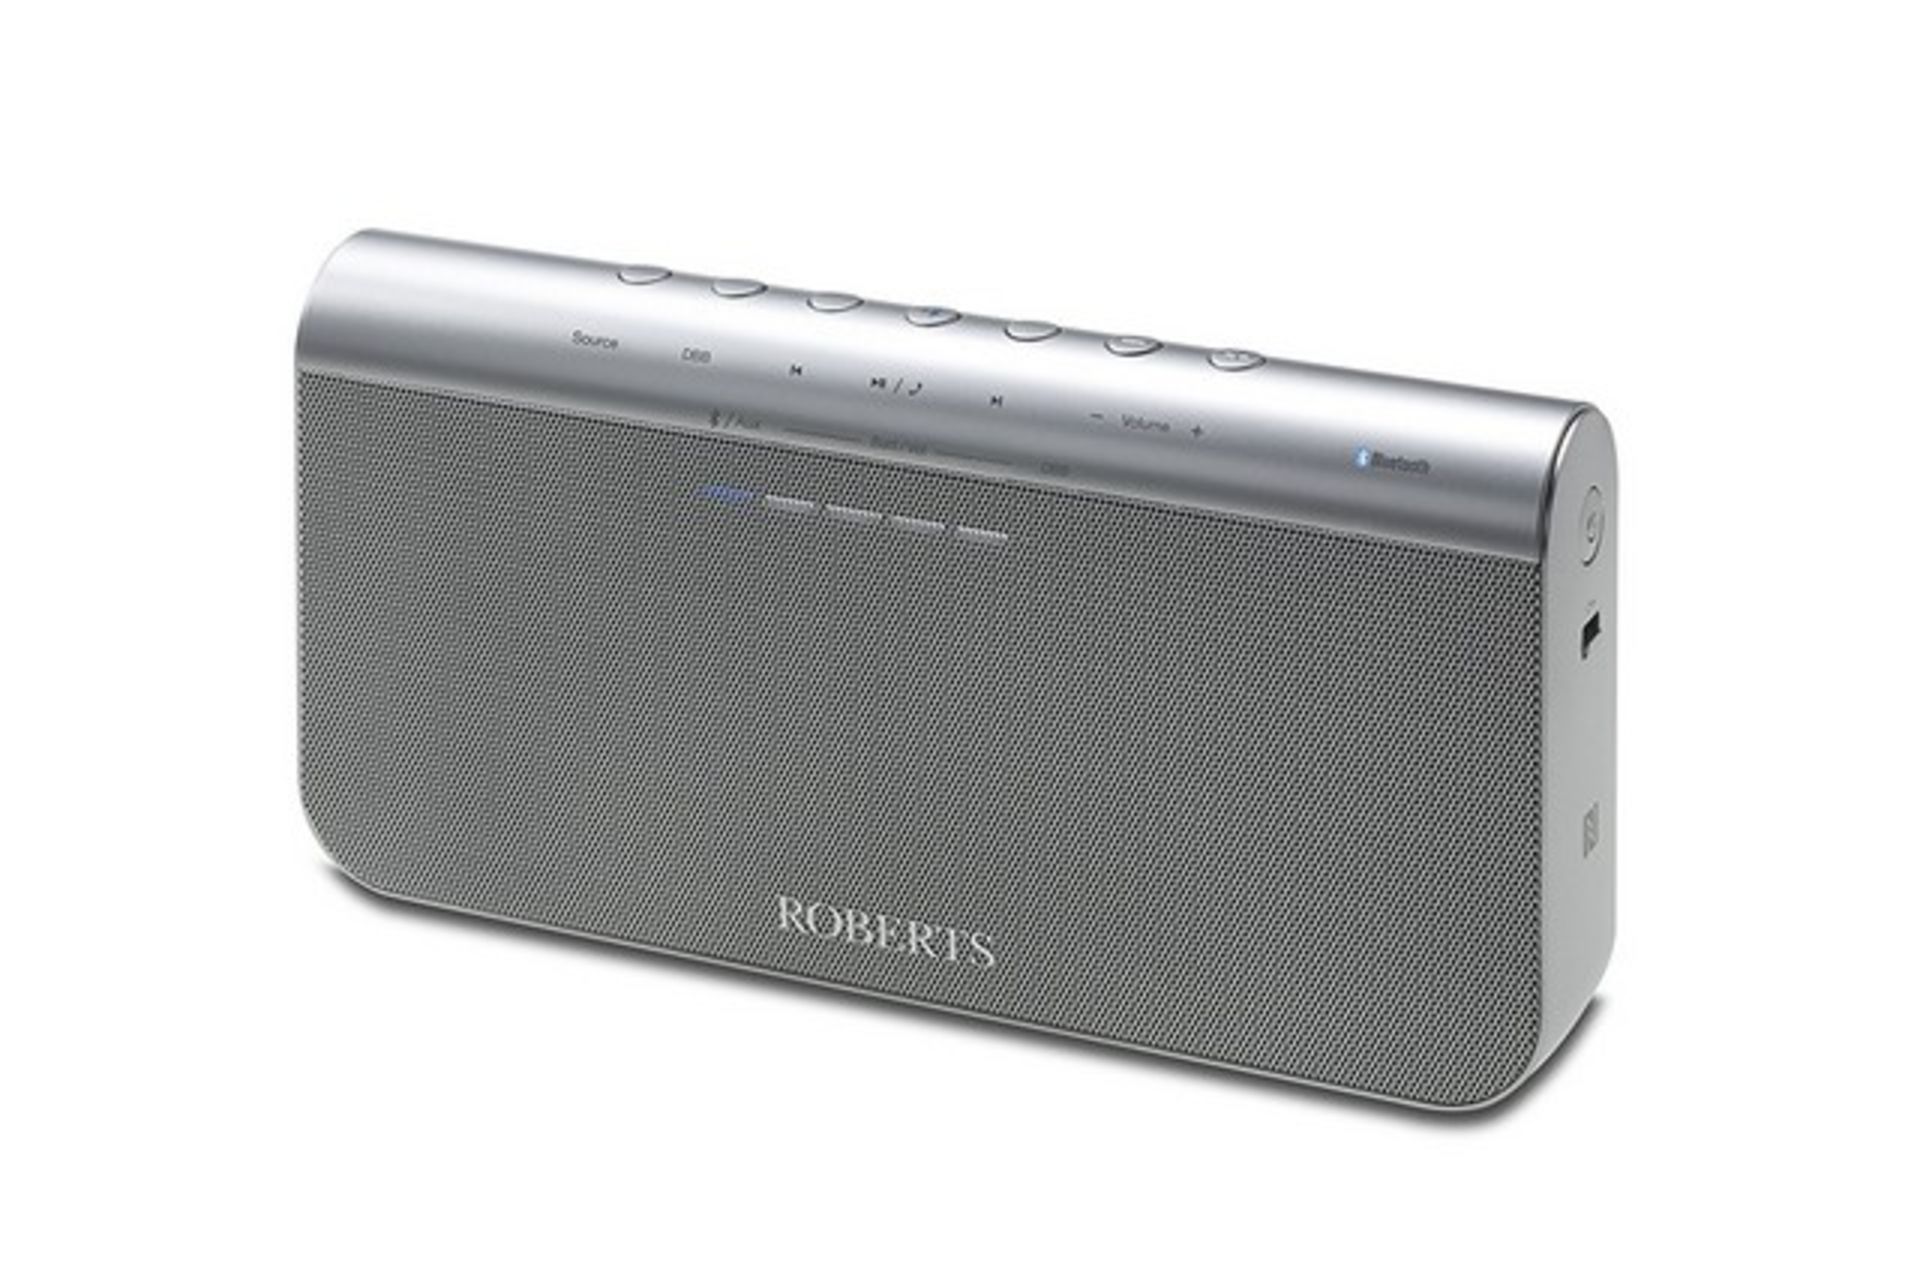 V Brand New Roberts BluPad Radio Portable Speaker With Built In Rechargable Battery And Leather